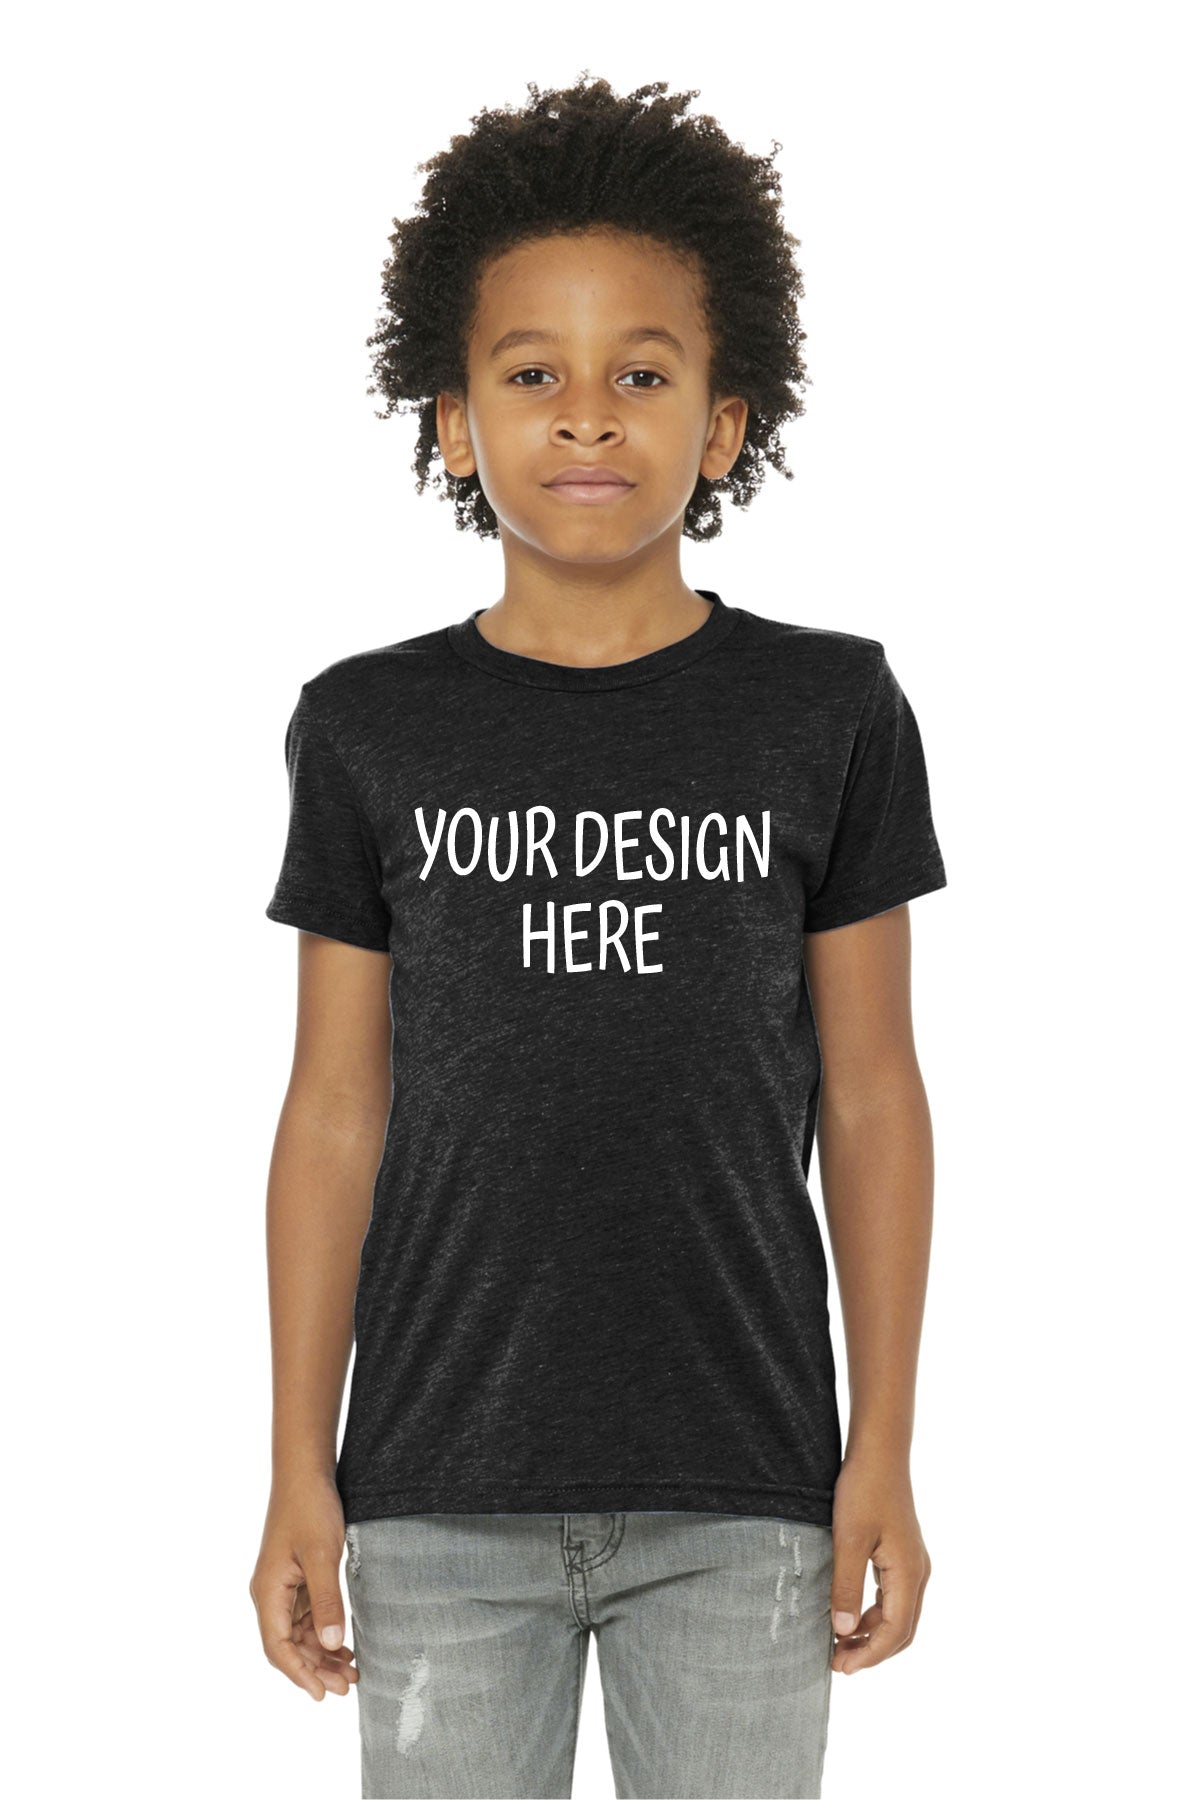 Youth Core Cotton Tee PC54Y - BT Imprintables Shirts